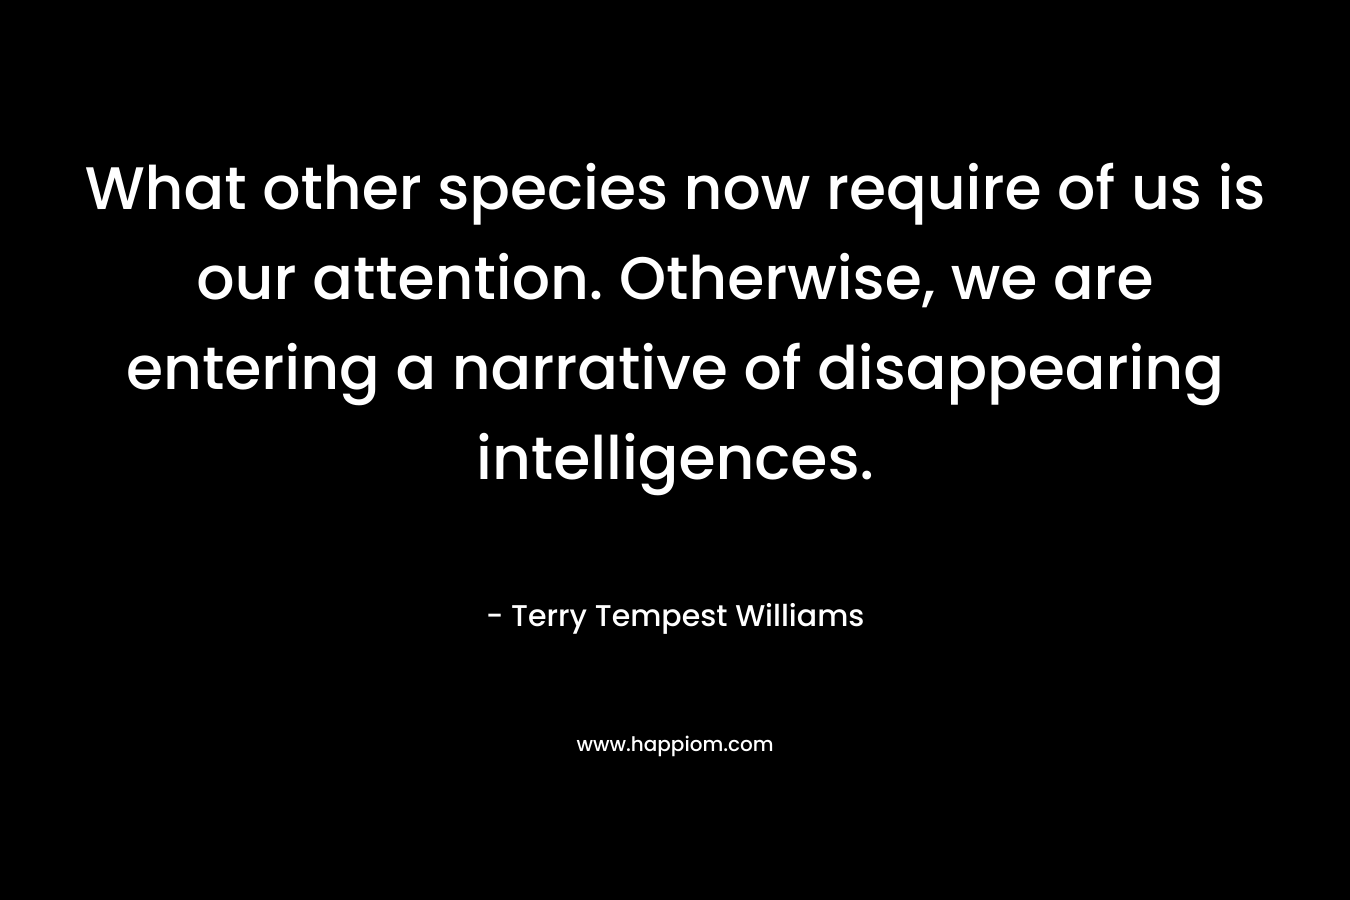 What other species now require of us is our attention. Otherwise, we are entering a narrative of disappearing intelligences.